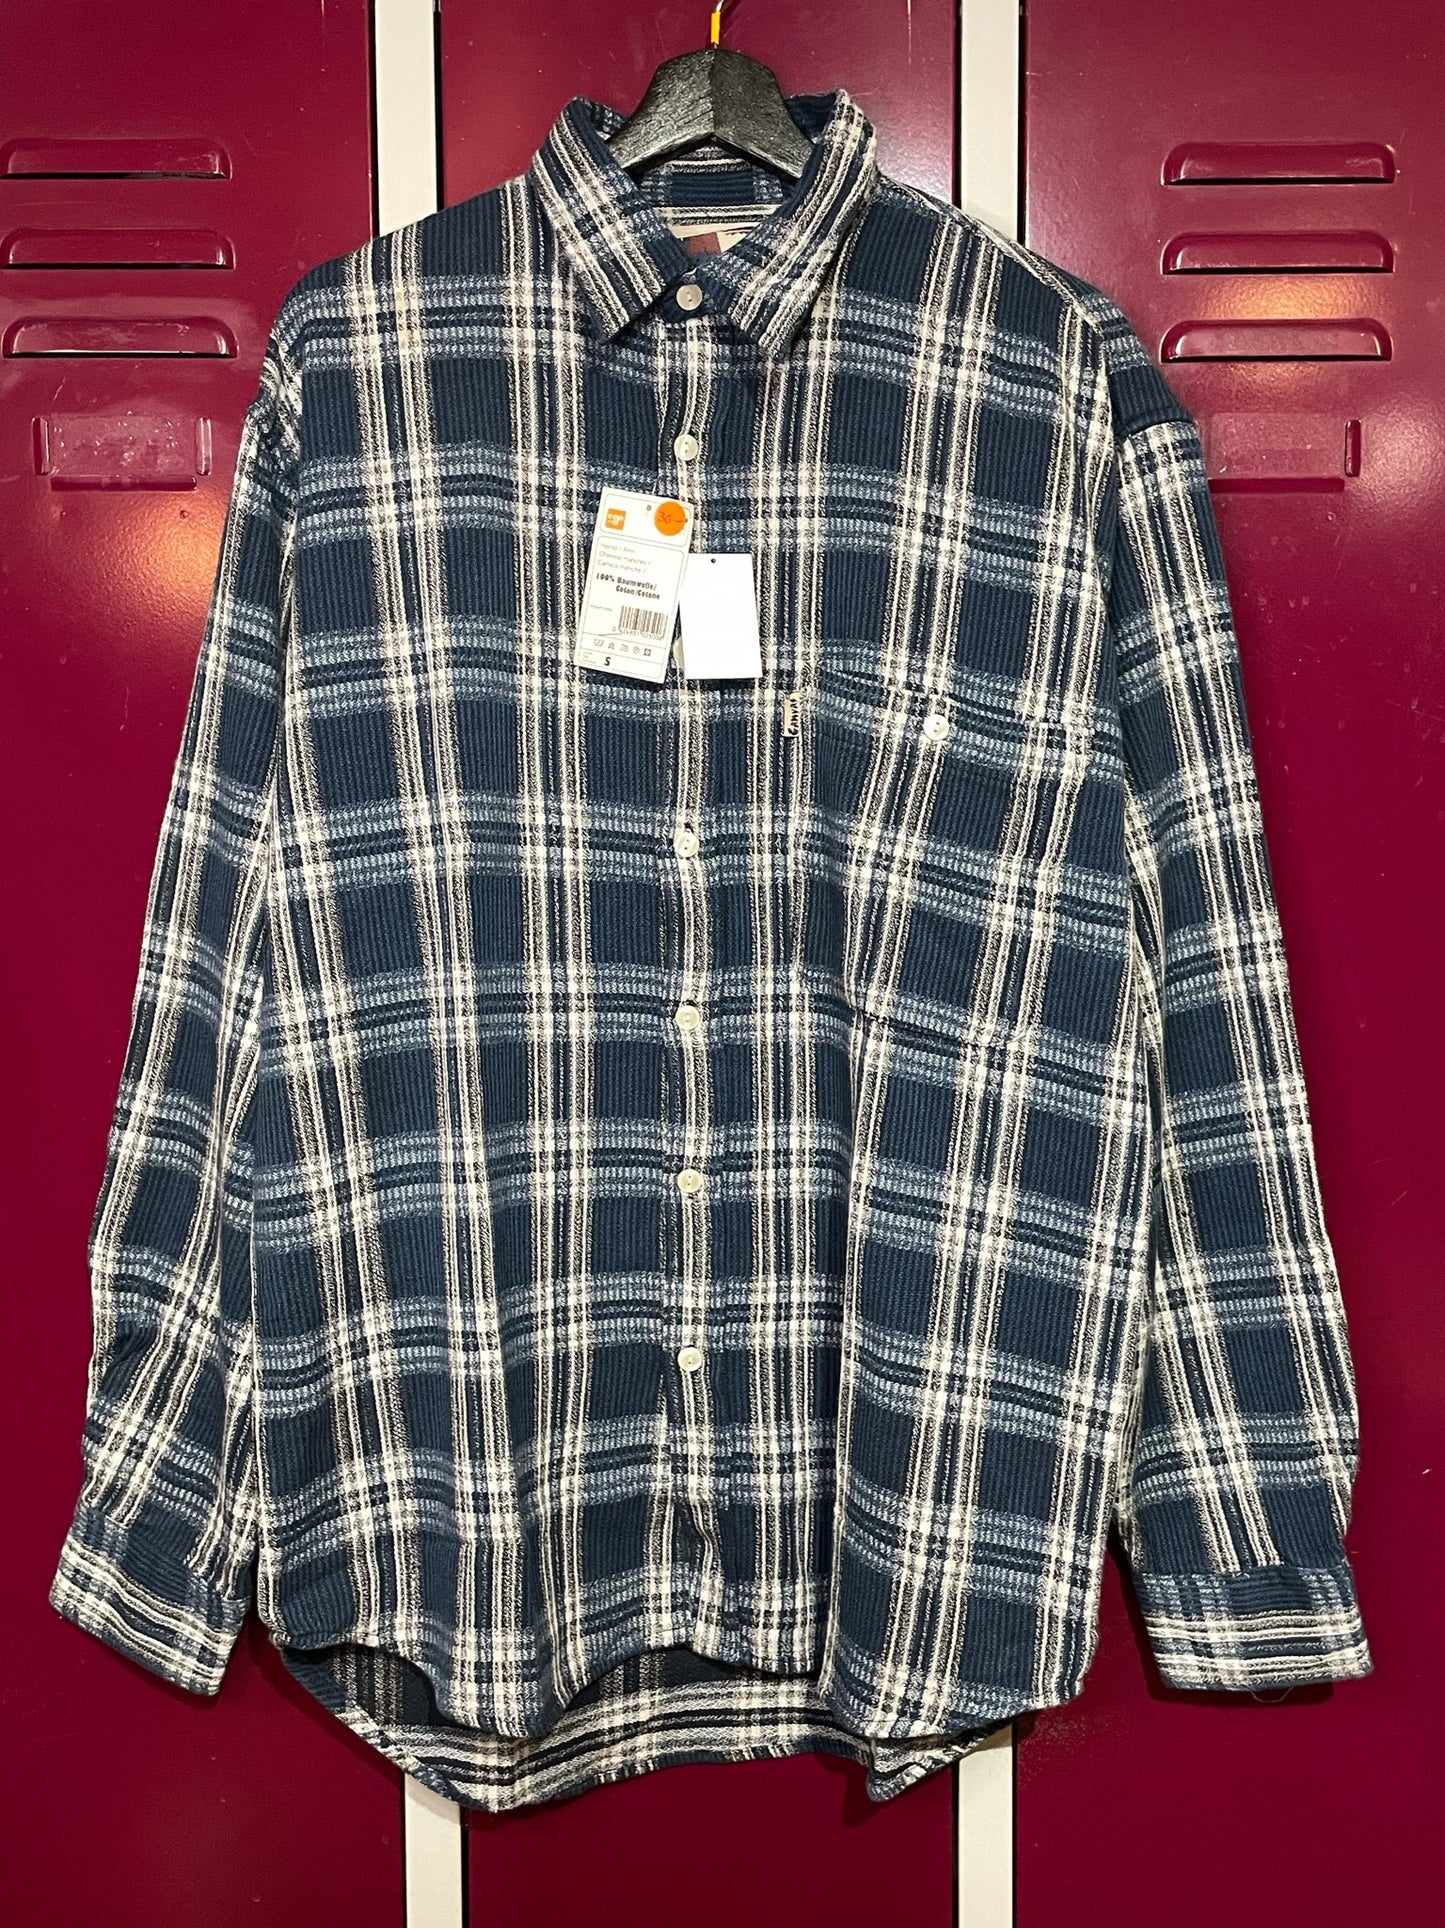 "DS" VINTAGE 90s CANVAS "COOP" CHECKED SHIRT  SZ: S (Oversized)